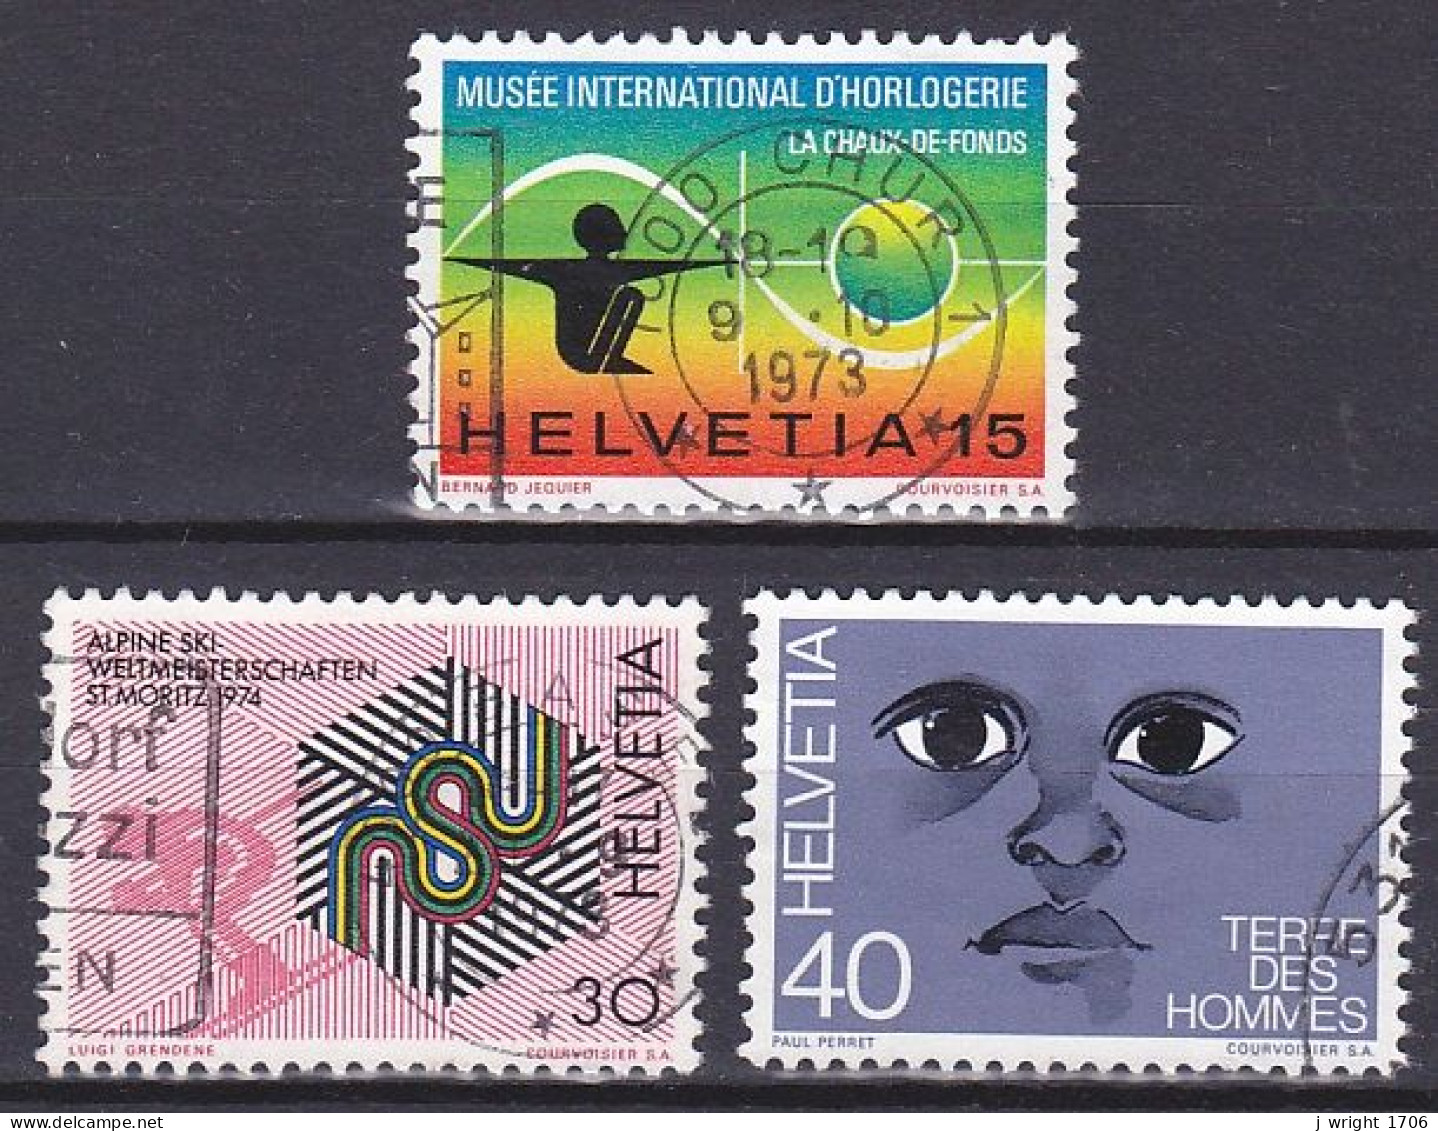 Switzerland, 1973, Publicity Issue, Set, USED - Used Stamps